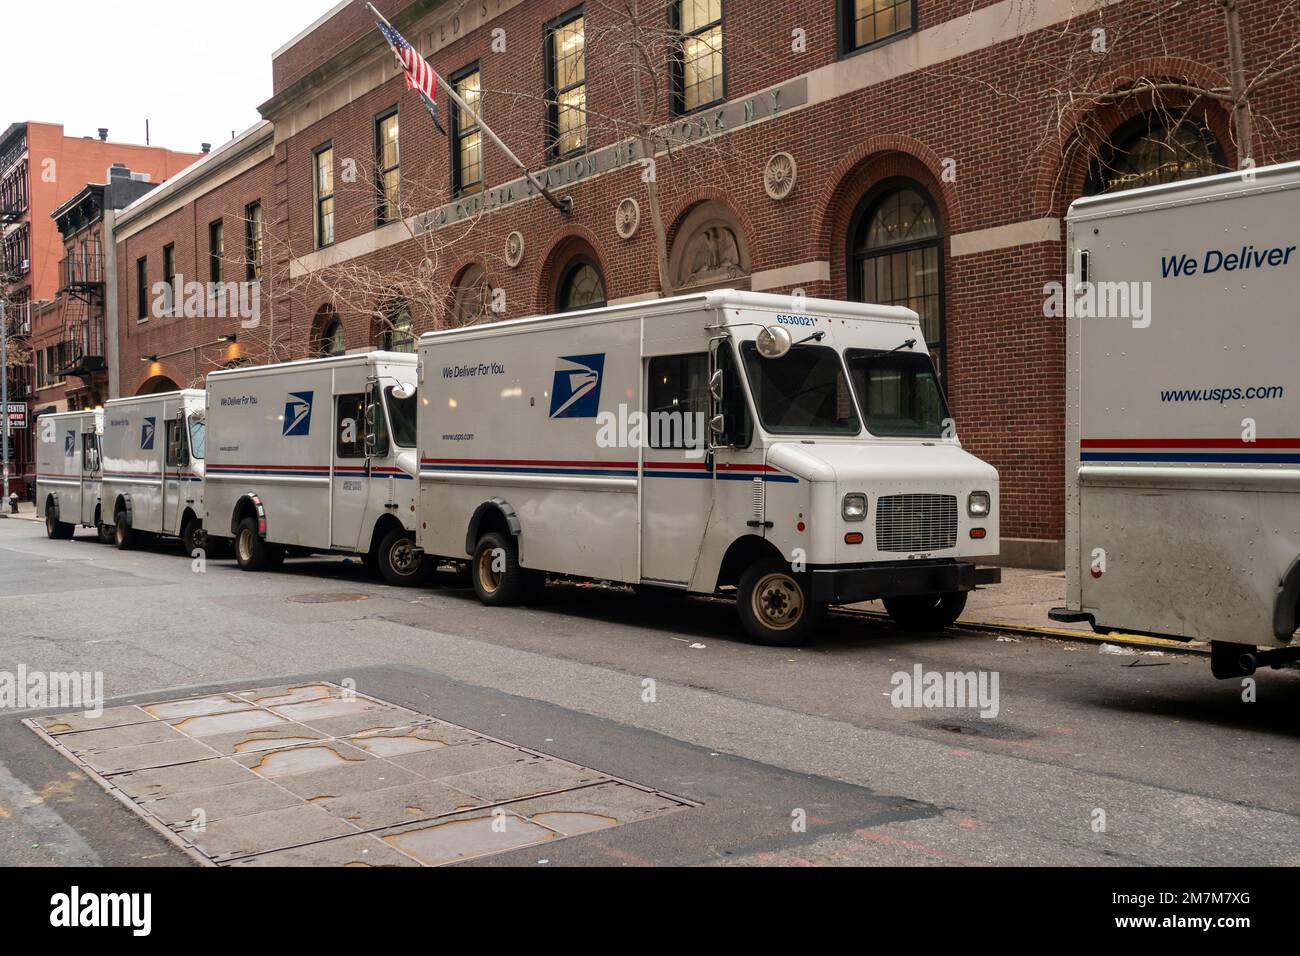 Usps Vehicles In Front Of The Old Chelsea Station Post Office In New York  On Monday, January 2, 2023. The Usps Recently Announced That It Will Have A  Fleet Of Over 66,000